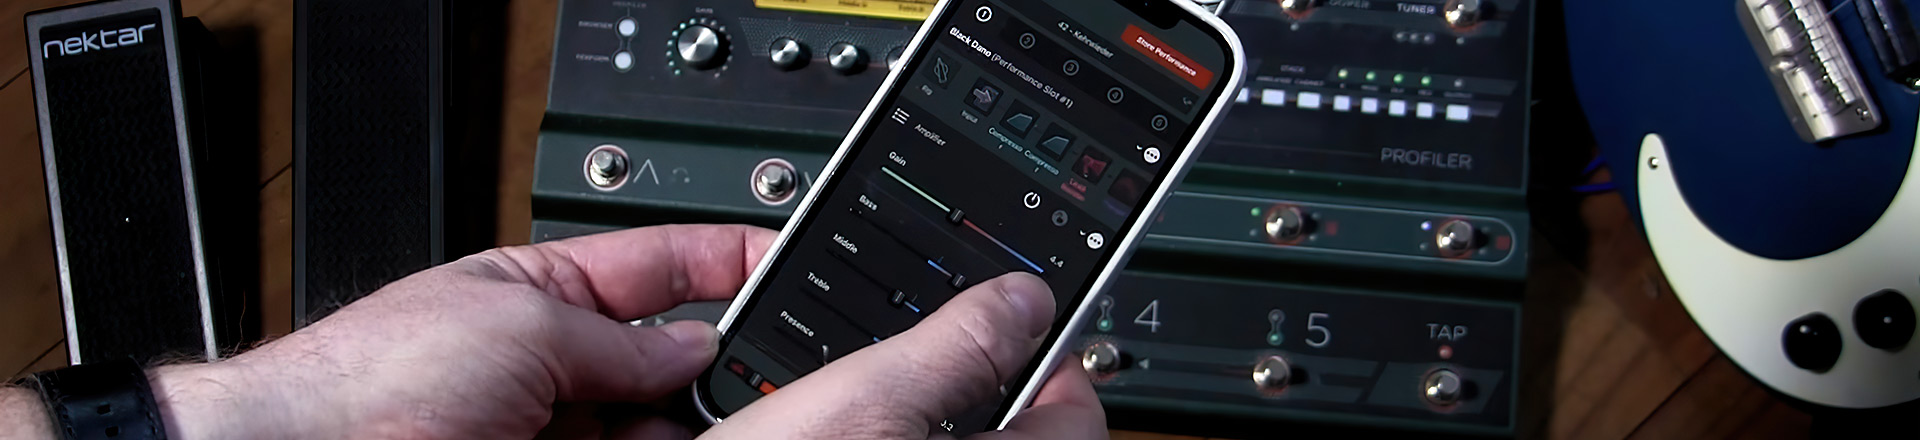 Kemper Rig Manager dostępny na iPhone